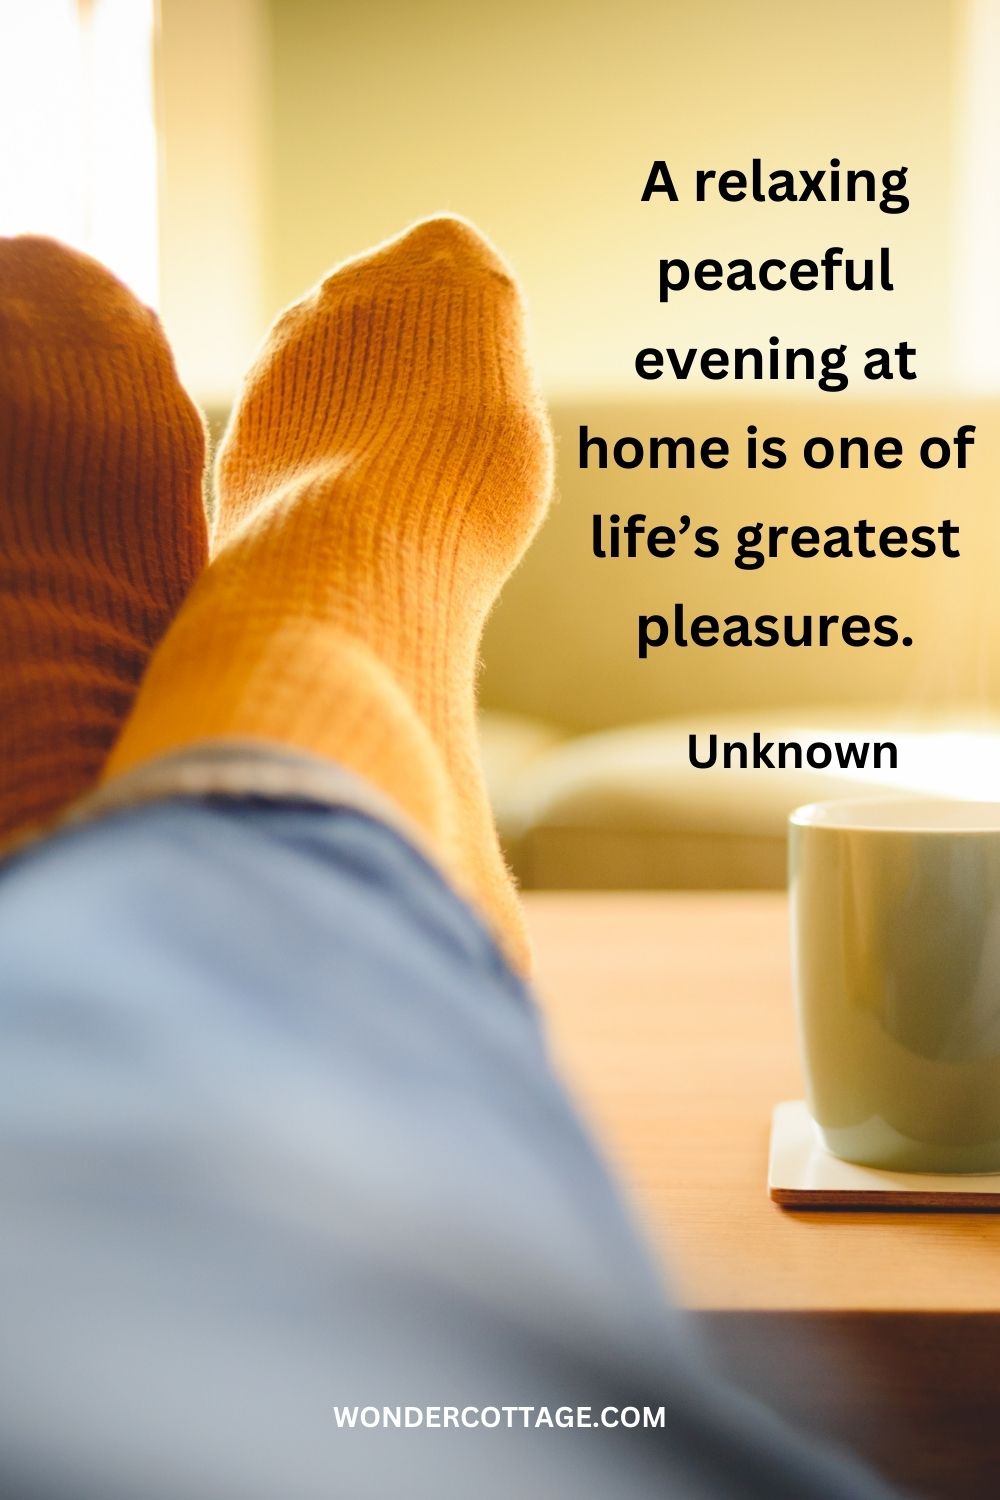 A relaxing peaceful evening at home is one of life’s greatest pleasures. Unknown